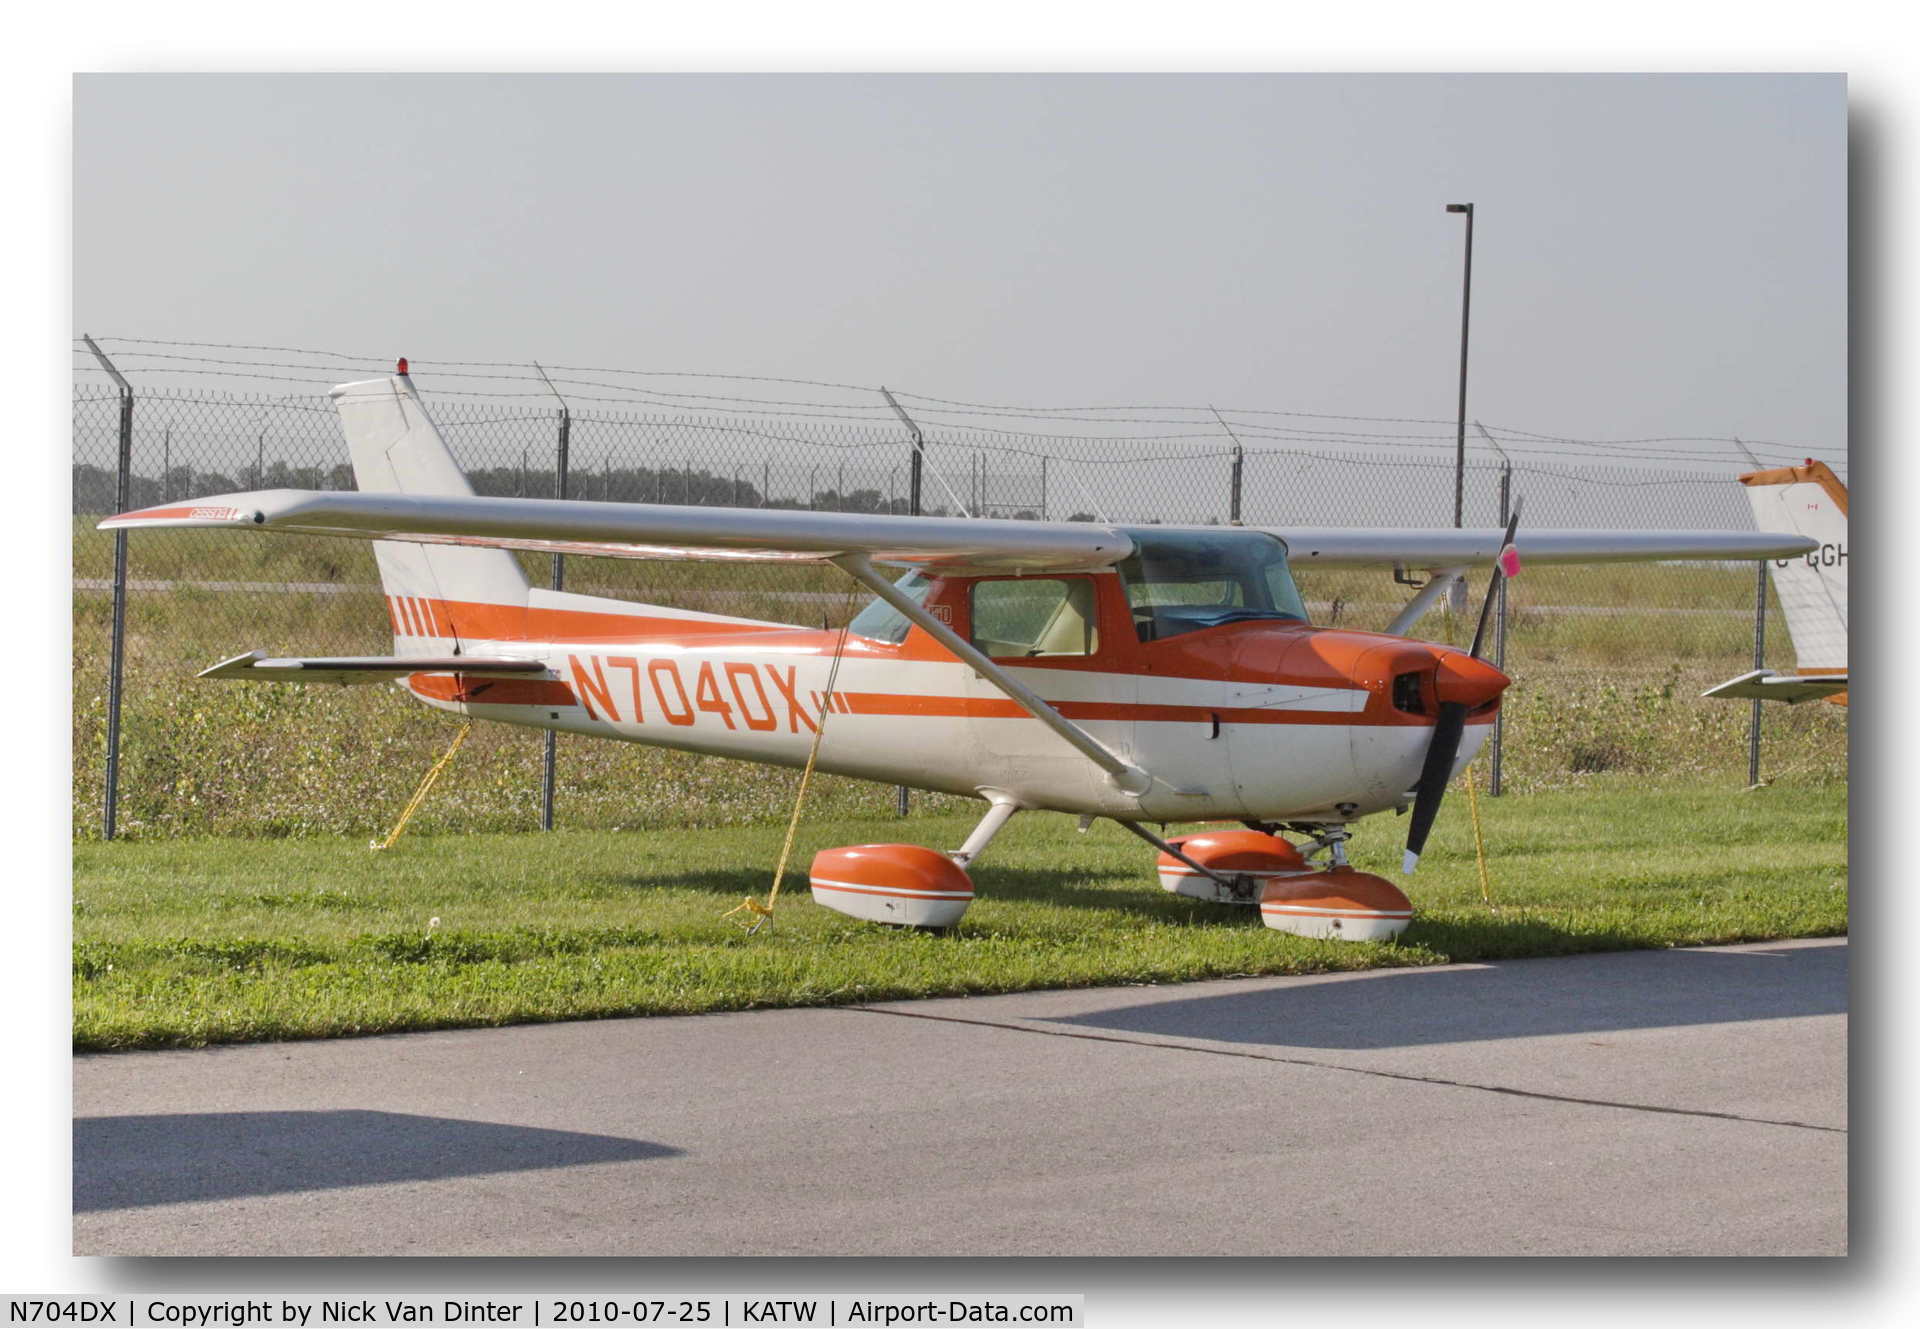 N704DX, 1976 Cessna 150M C/N 15078539, Sure KATW is nice ... I still want to go to Oshkosh!